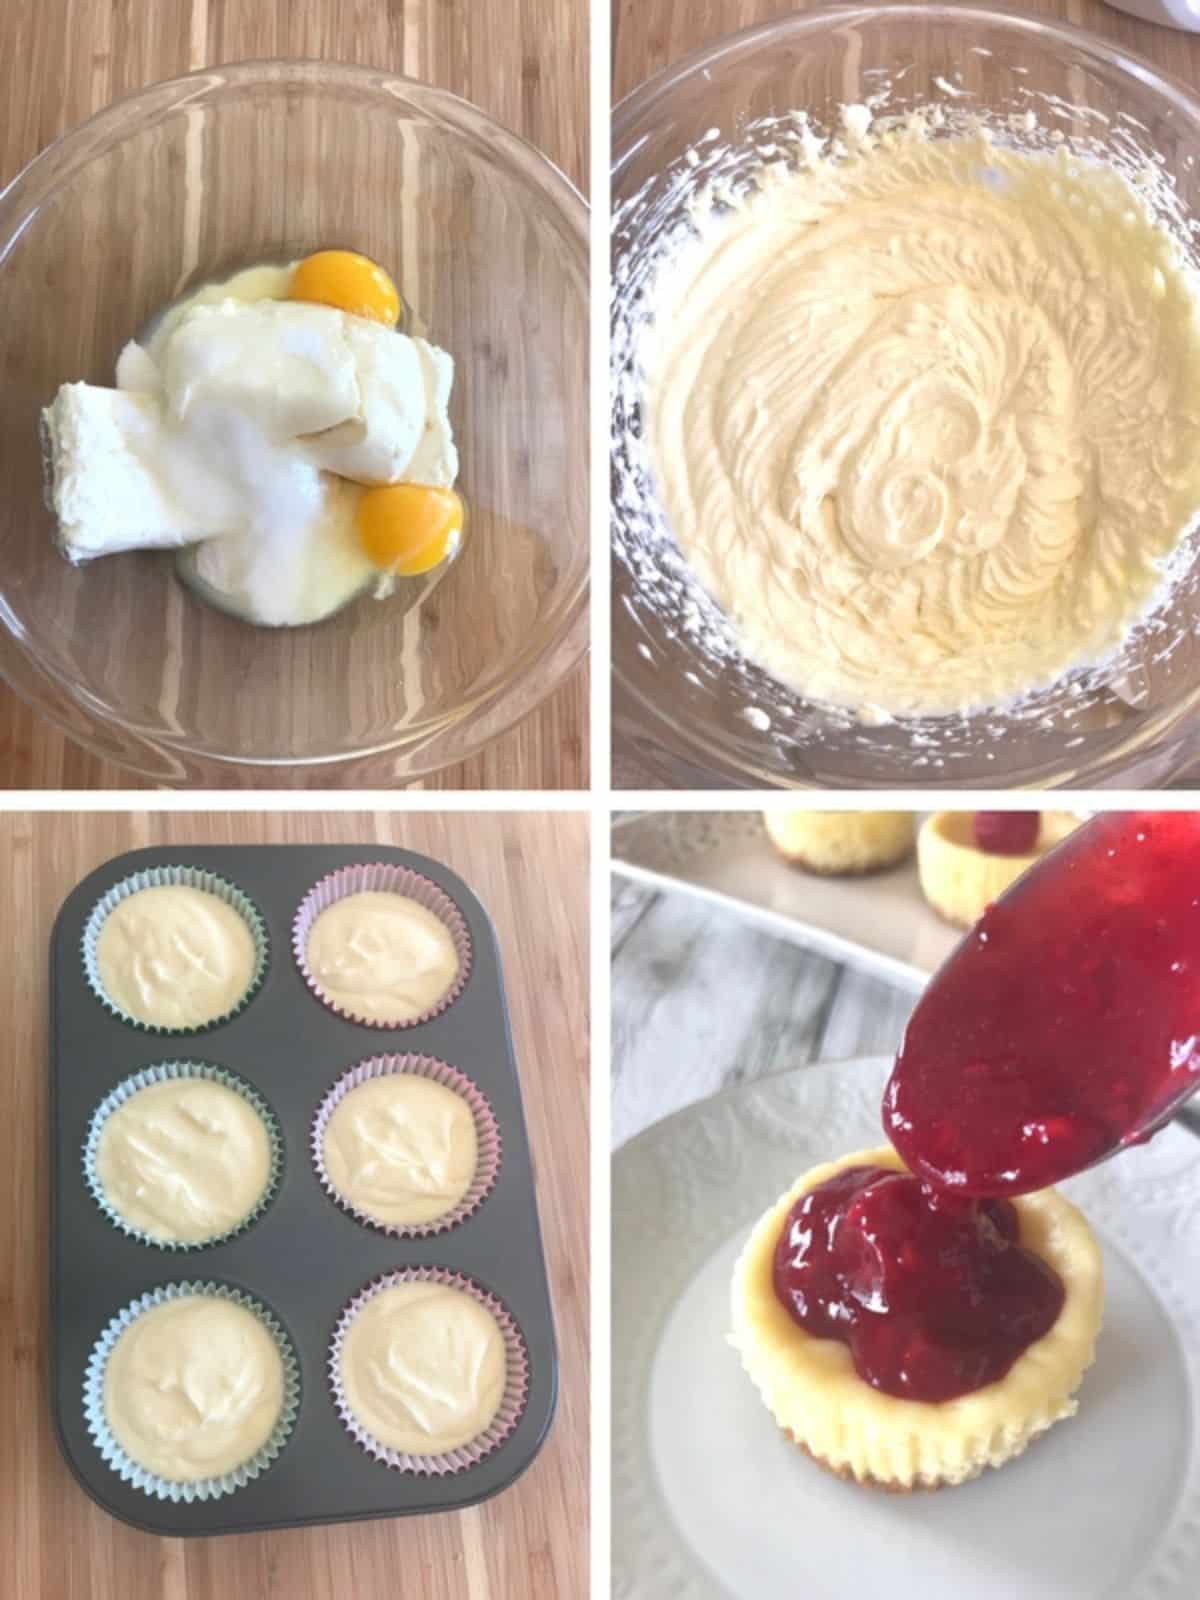 A collage of four images showing how to make mini cheesecakes.